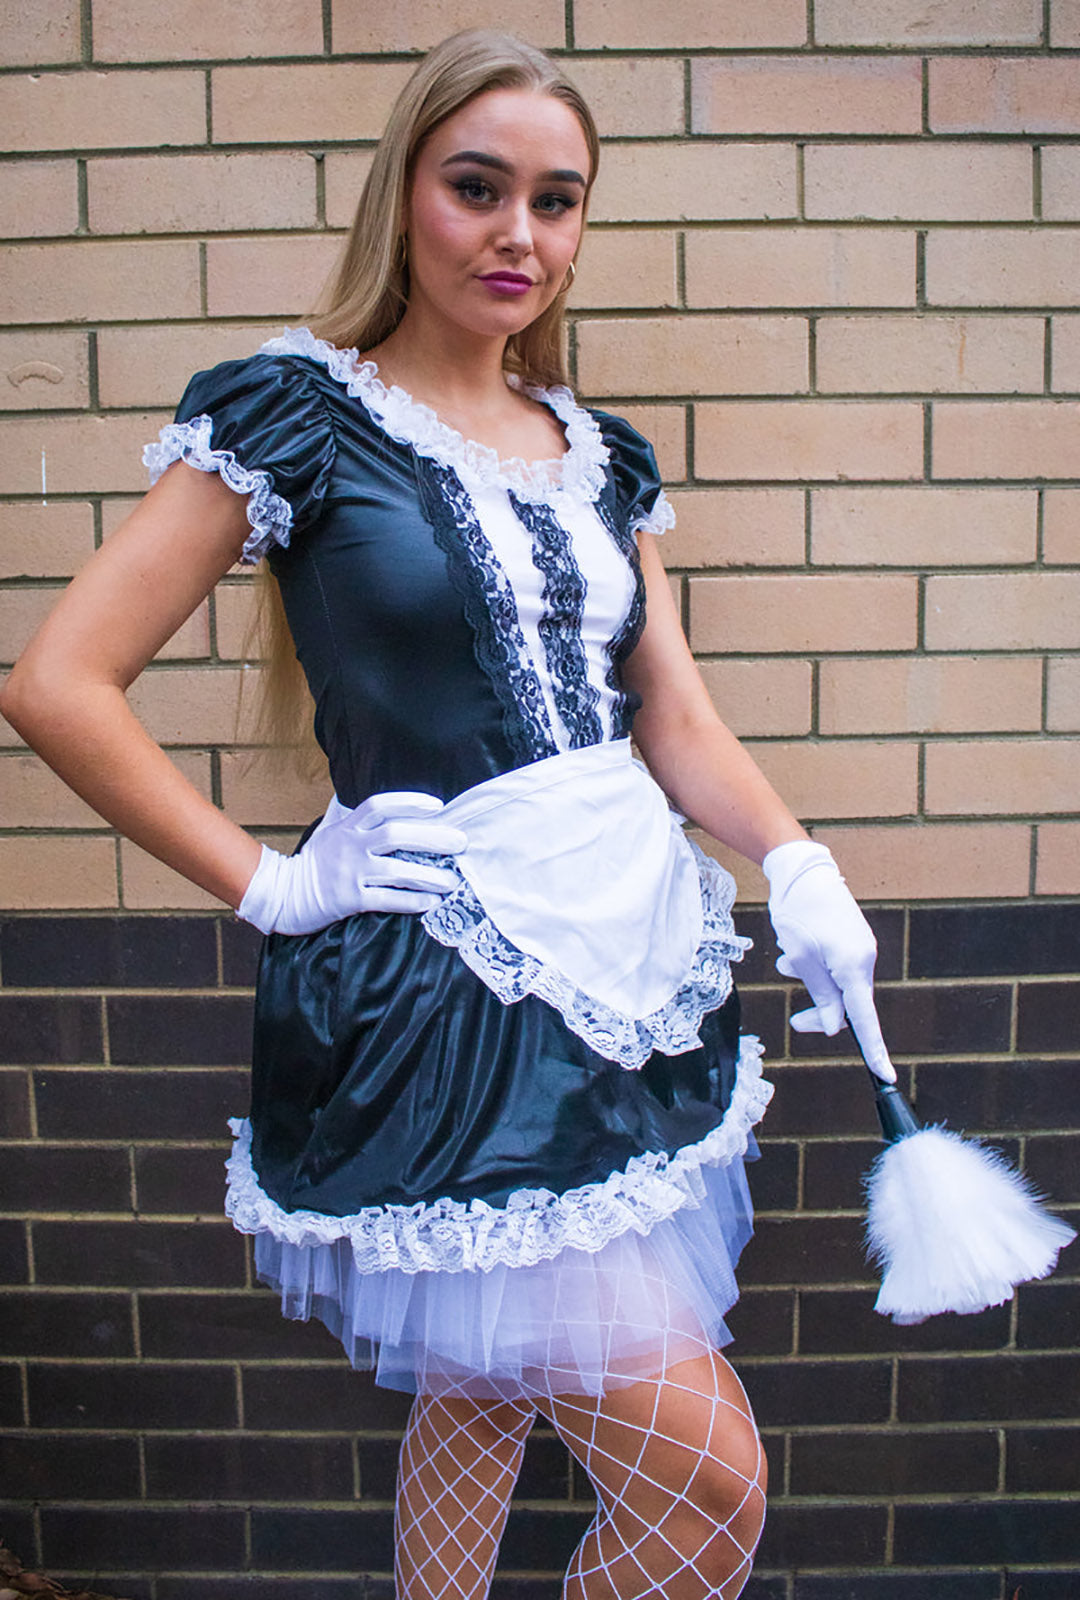 Sexy Lace Maid Costume